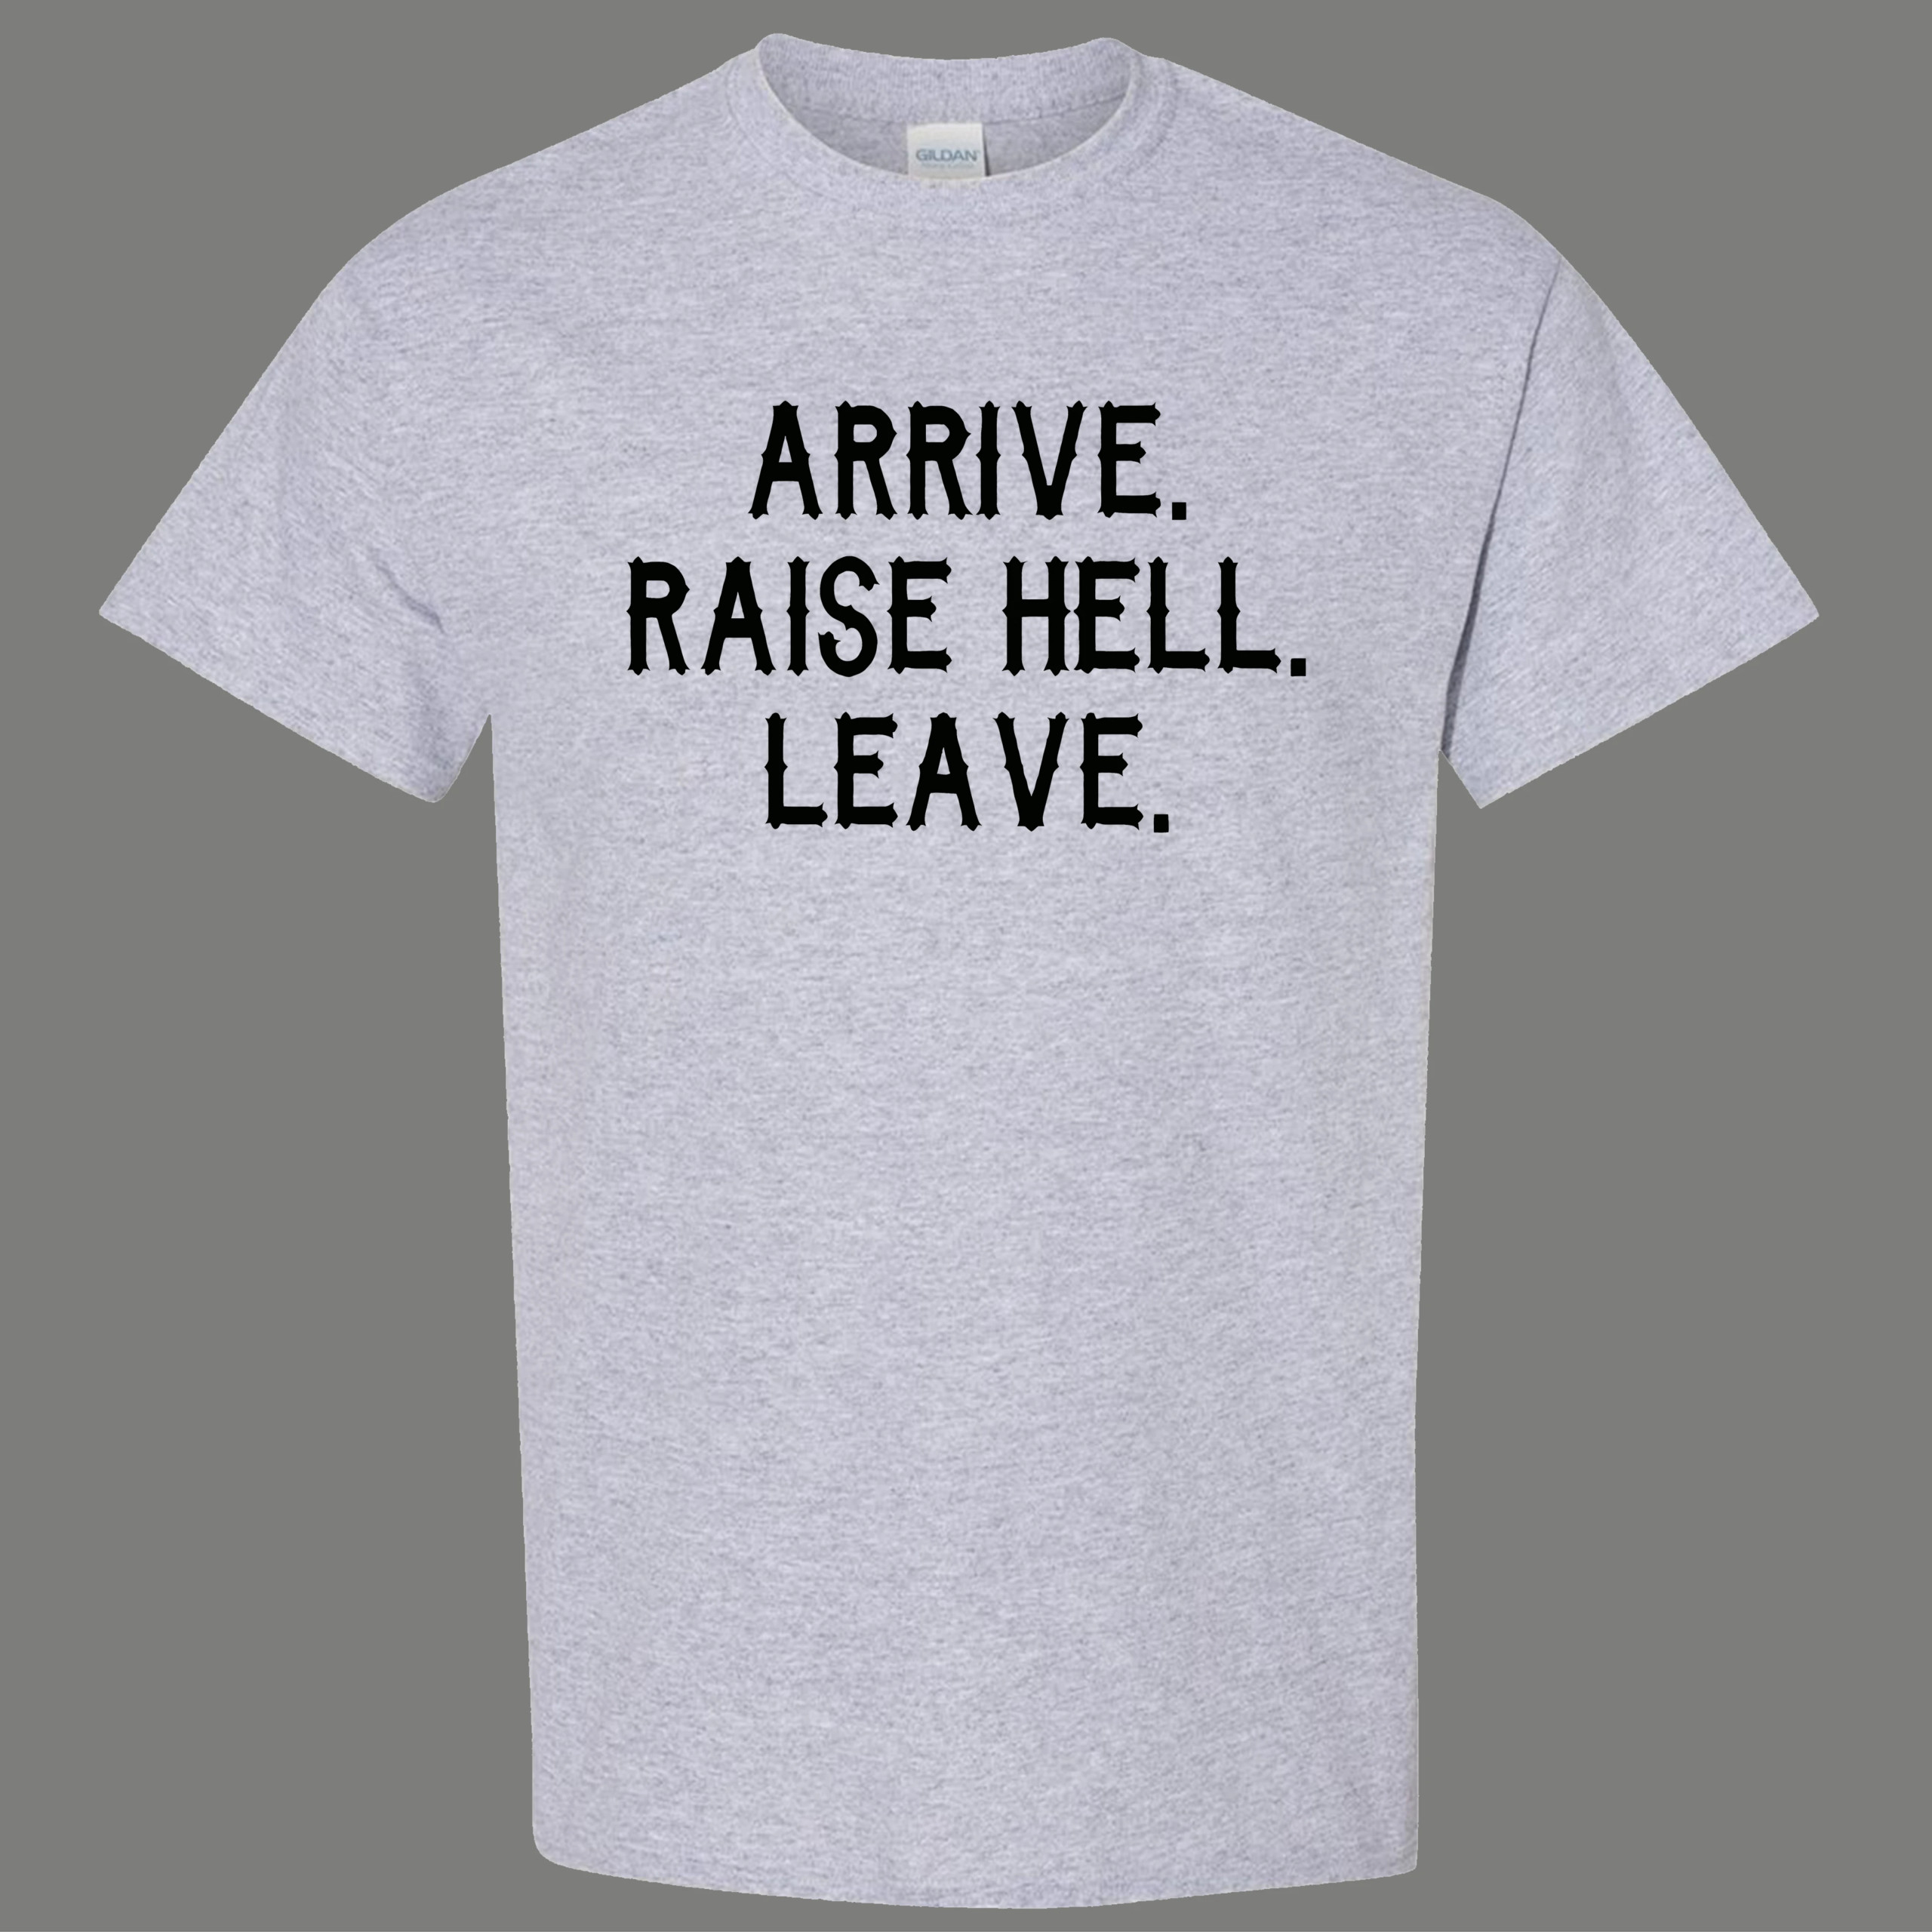 Arrive Raise Hell Leave T-shirt Funny Hilarious Party Sarcastic Tee Shirt 